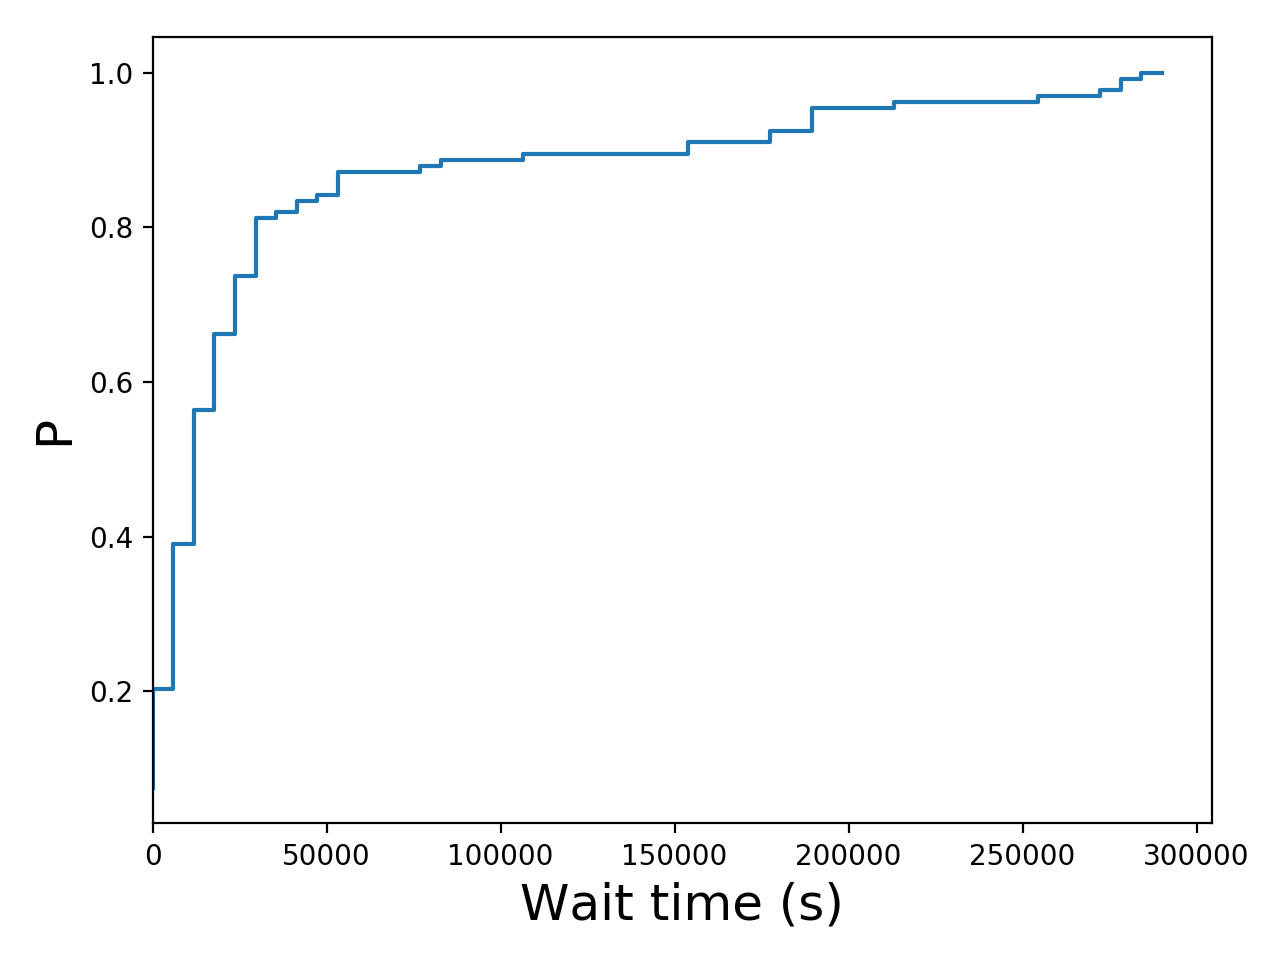 Task wait time CDF graph for the Pegasus_P5 trace.